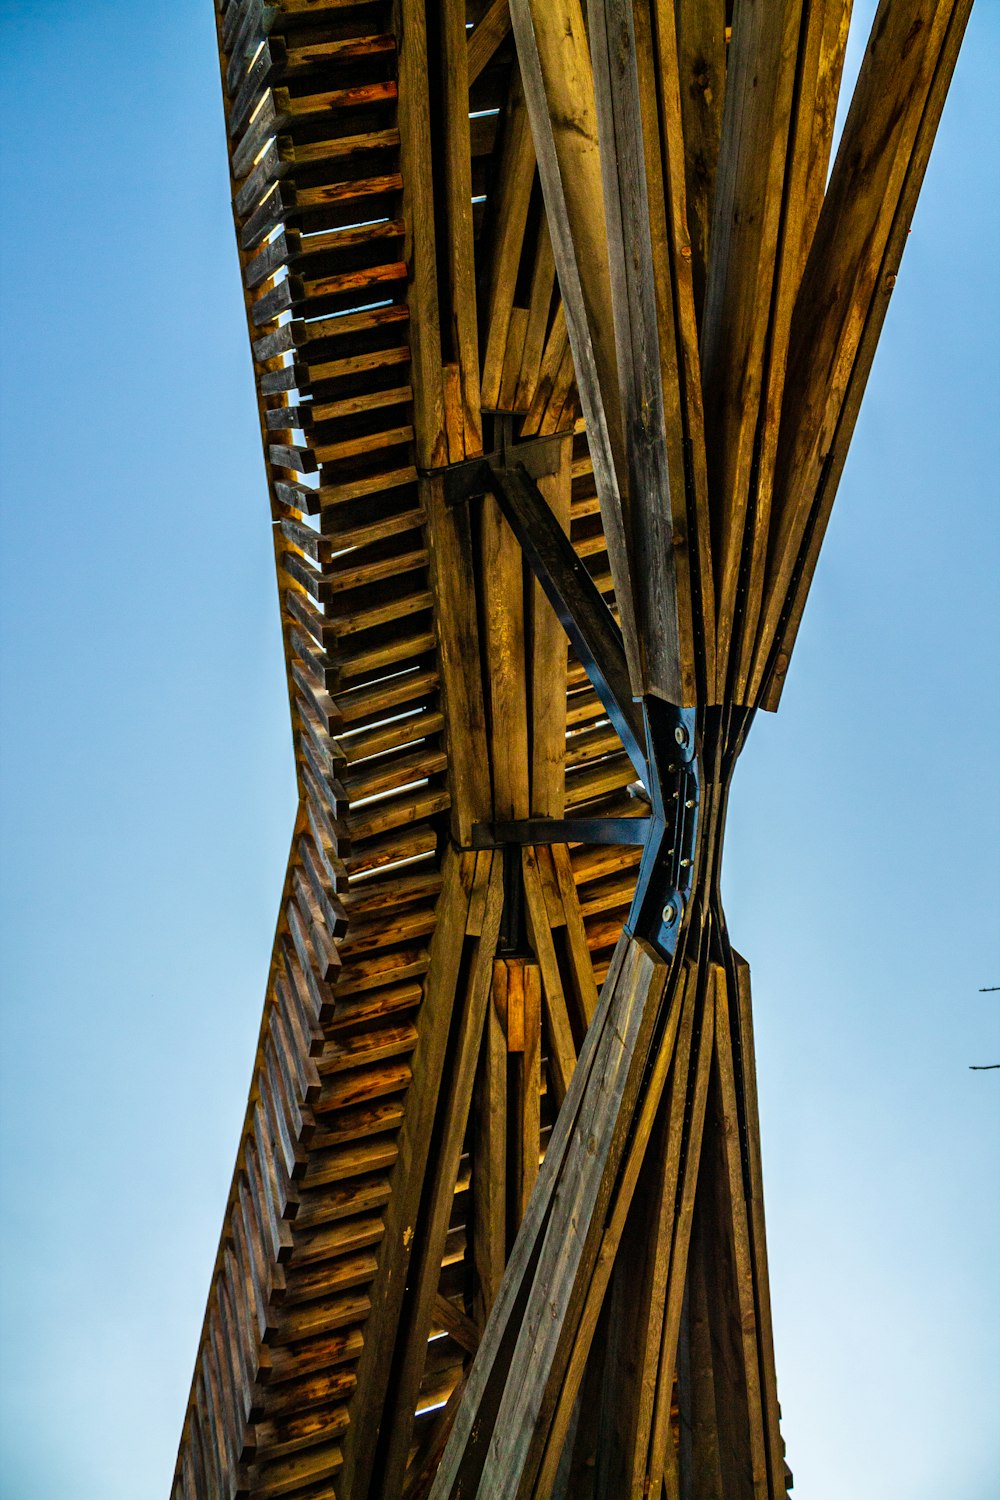 the underside of a wooden structure against a blue sky